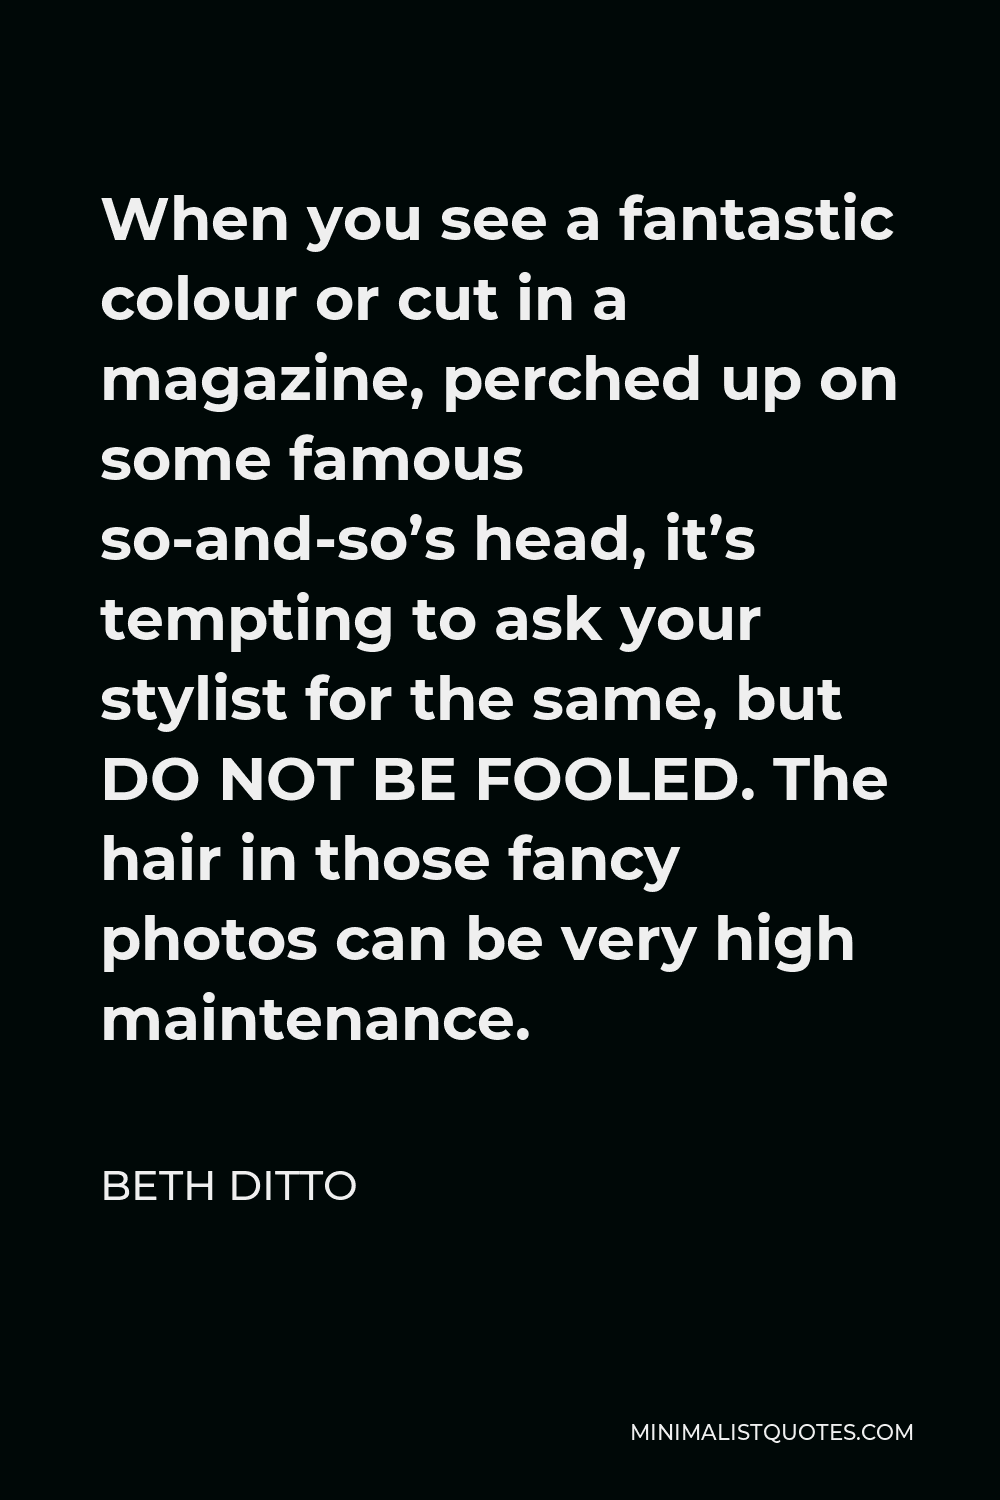 Beth Ditto Quote - When you see a fantastic colour or cut in a magazine, perched up on some famous so-and-so’s head, it’s tempting to ask your stylist for the same, but DO NOT BE FOOLED. The hair in those fancy photos can be very high maintenance.